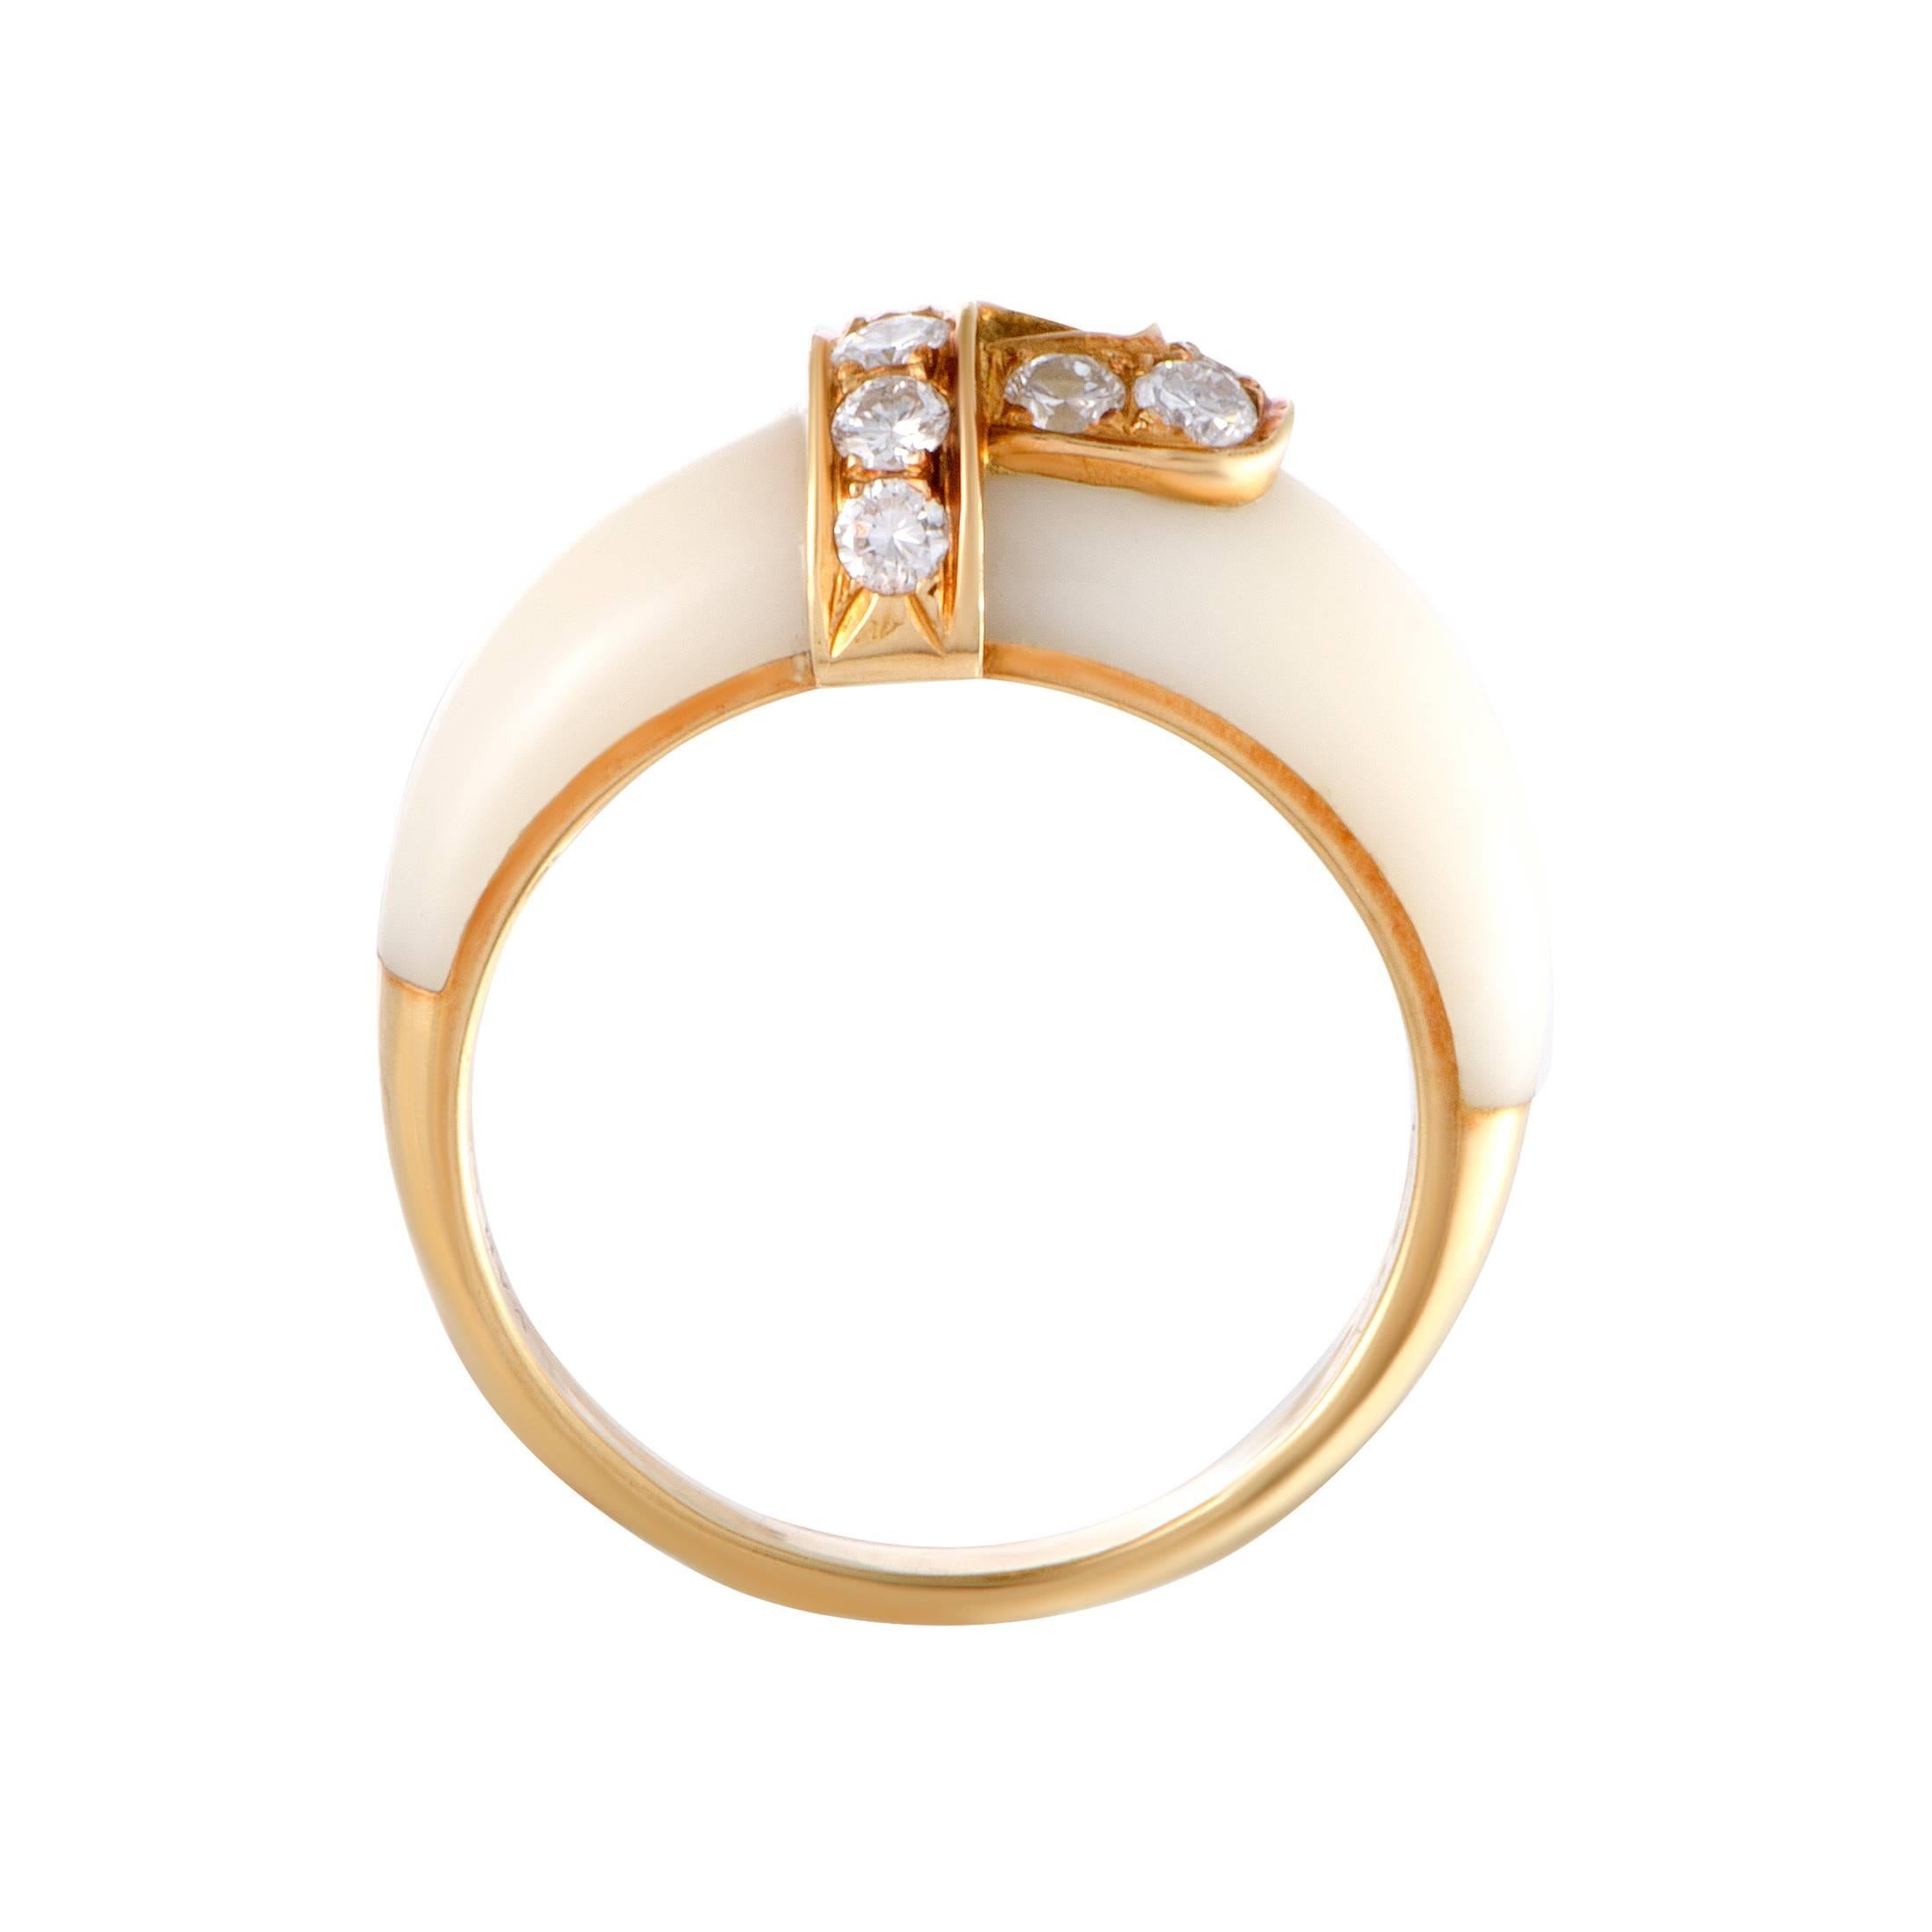 Creating a delightfully harmonious aesthetic effect, the radiant 18K yellow gold and the sublime white coral are featured in this splendid ring in the most stylish manner. The ring is a Van Cleef & Arpels design and also boasts scintillating diamond